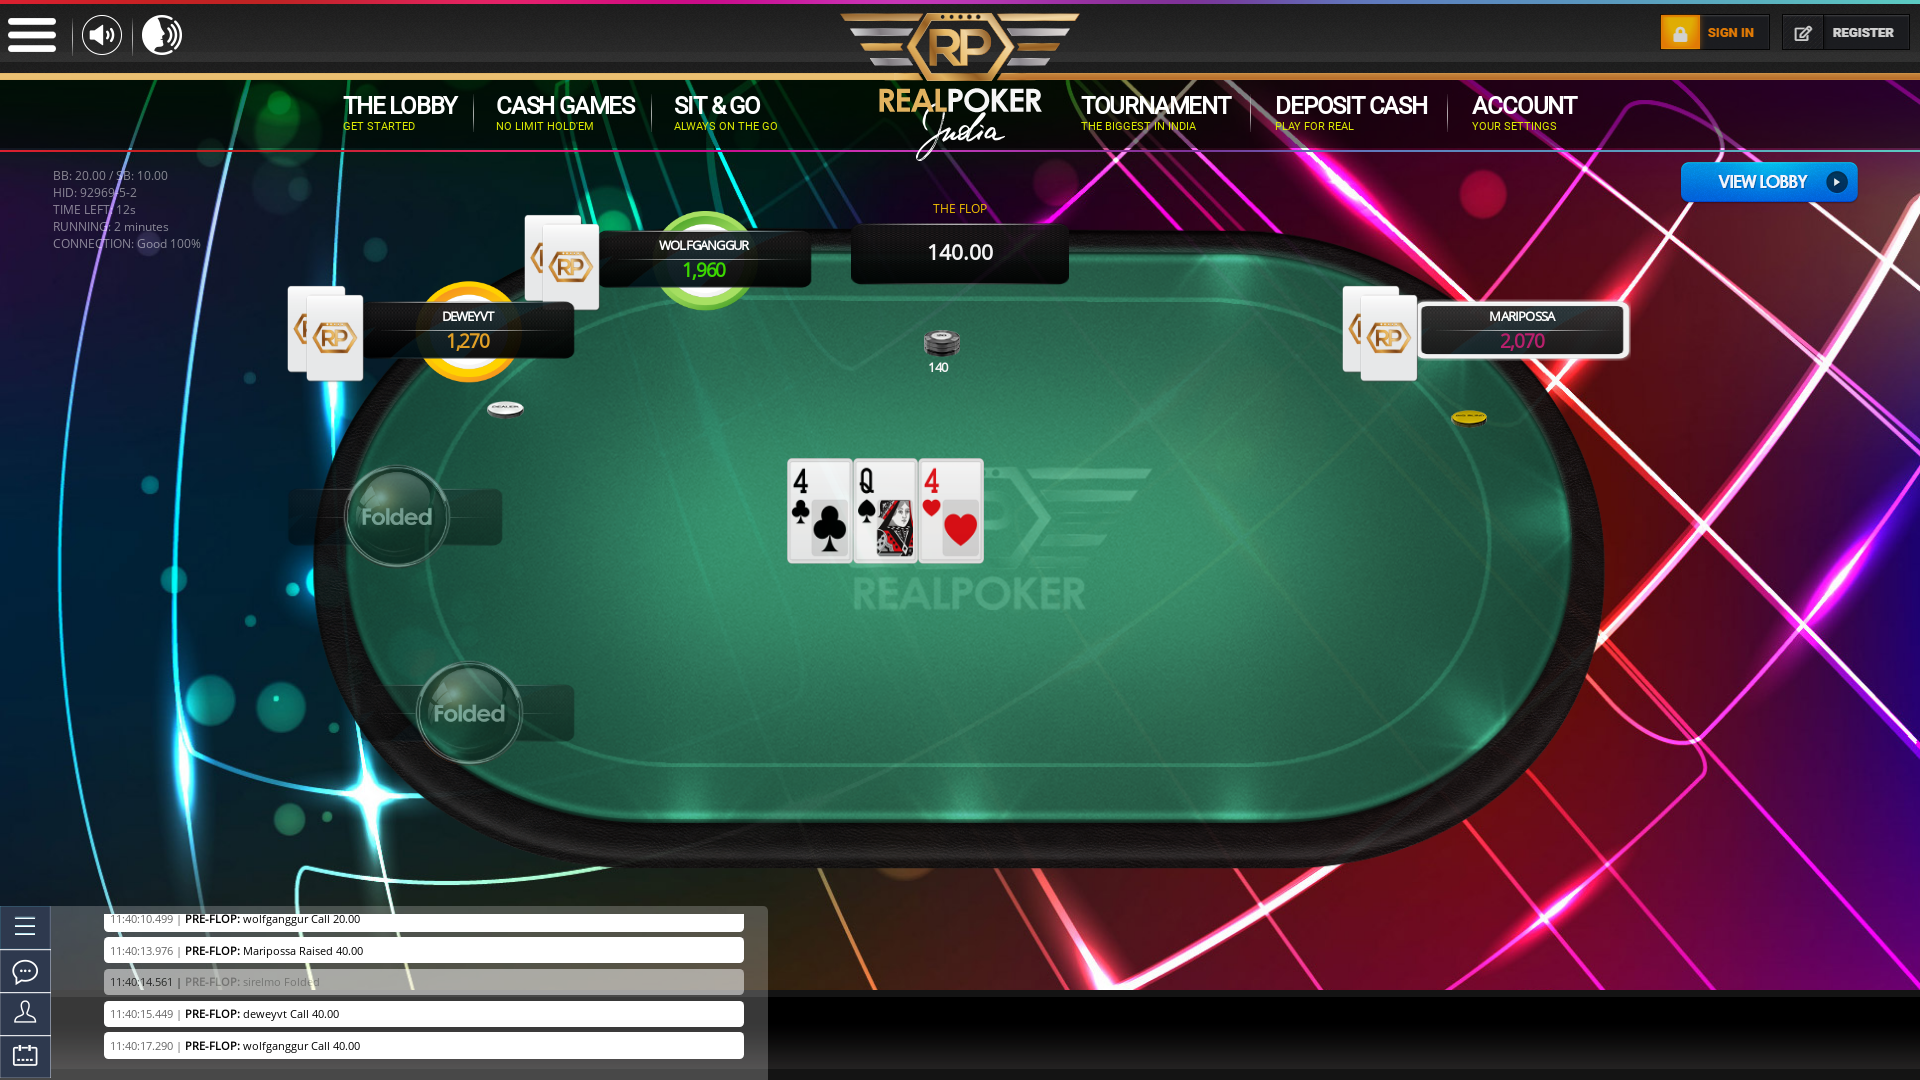 Real poker 10 player table in the 2nd minute